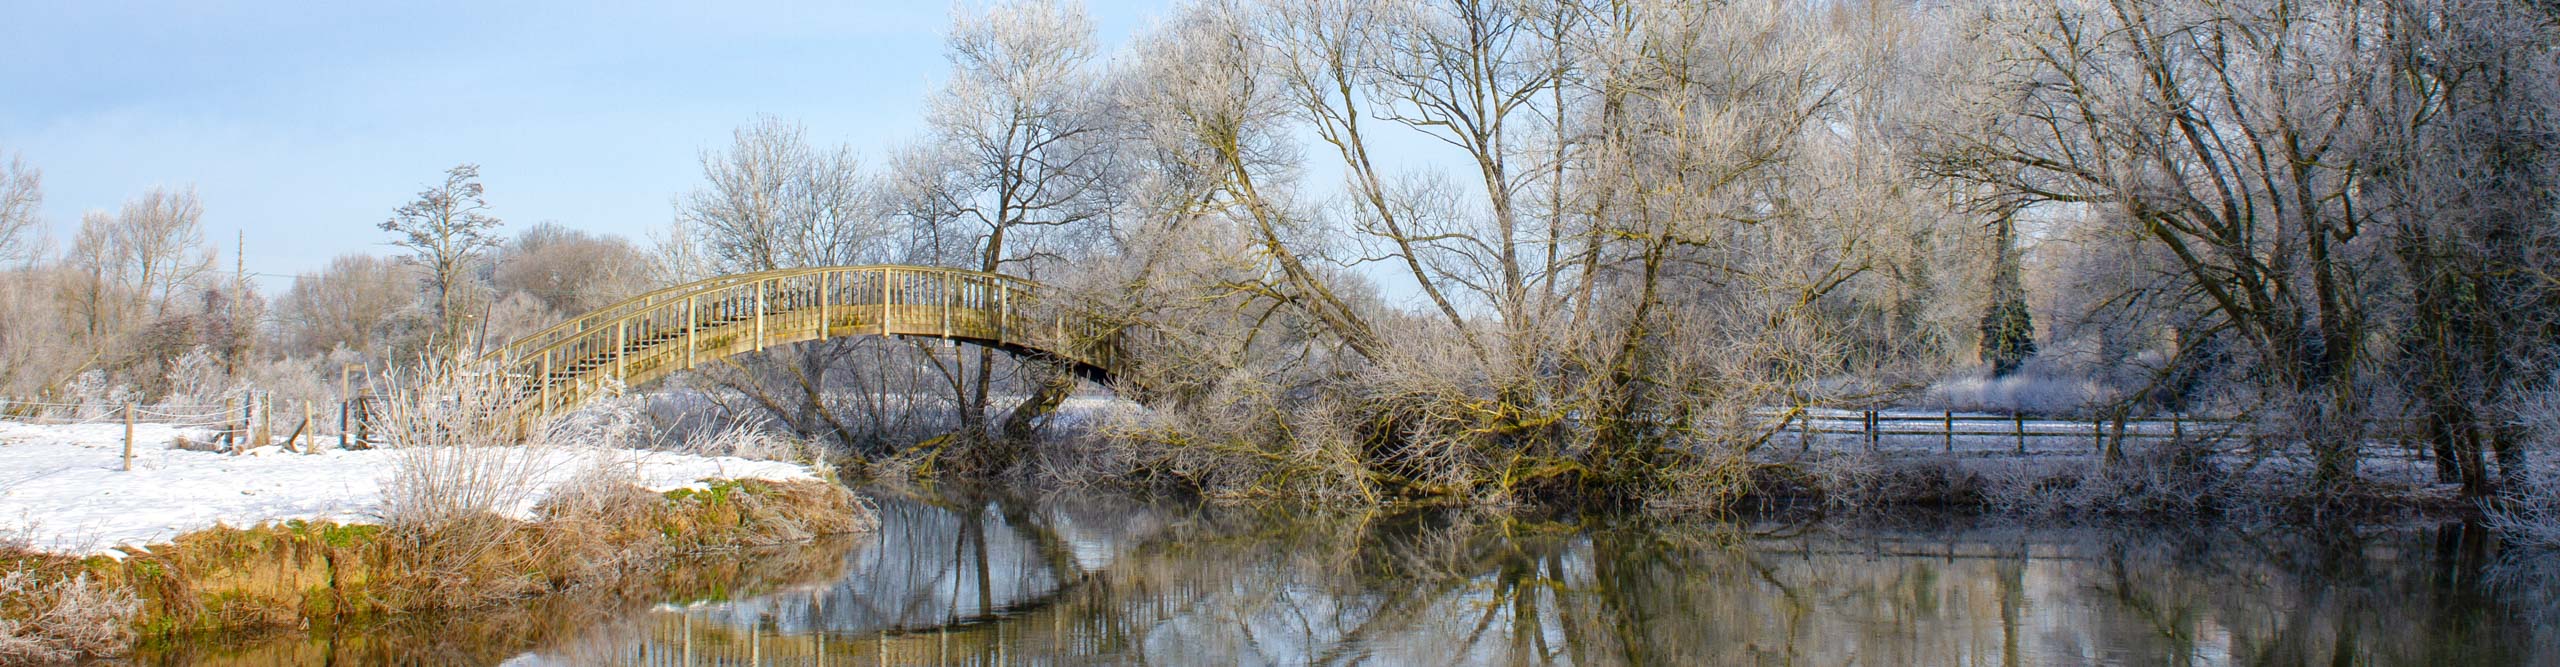 Winter Scene over the River Thames at Buscot, Oxfordshire, UK